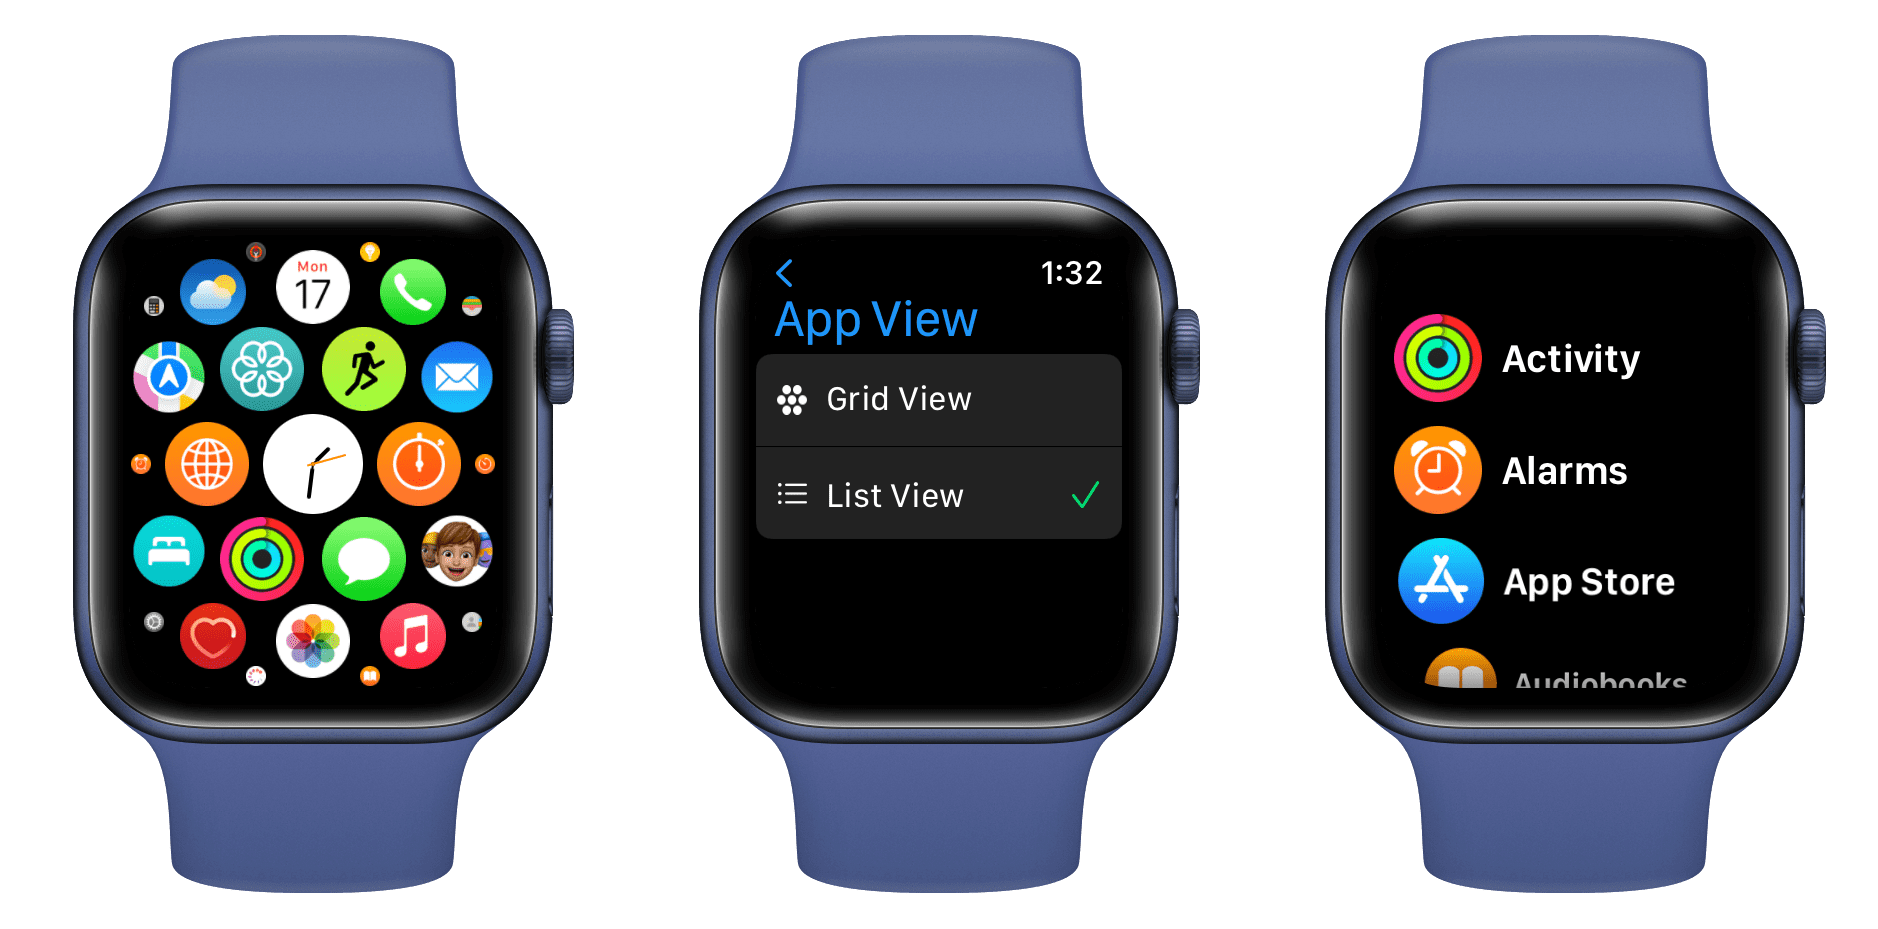 Grid View and List View for apps on Apple Watch